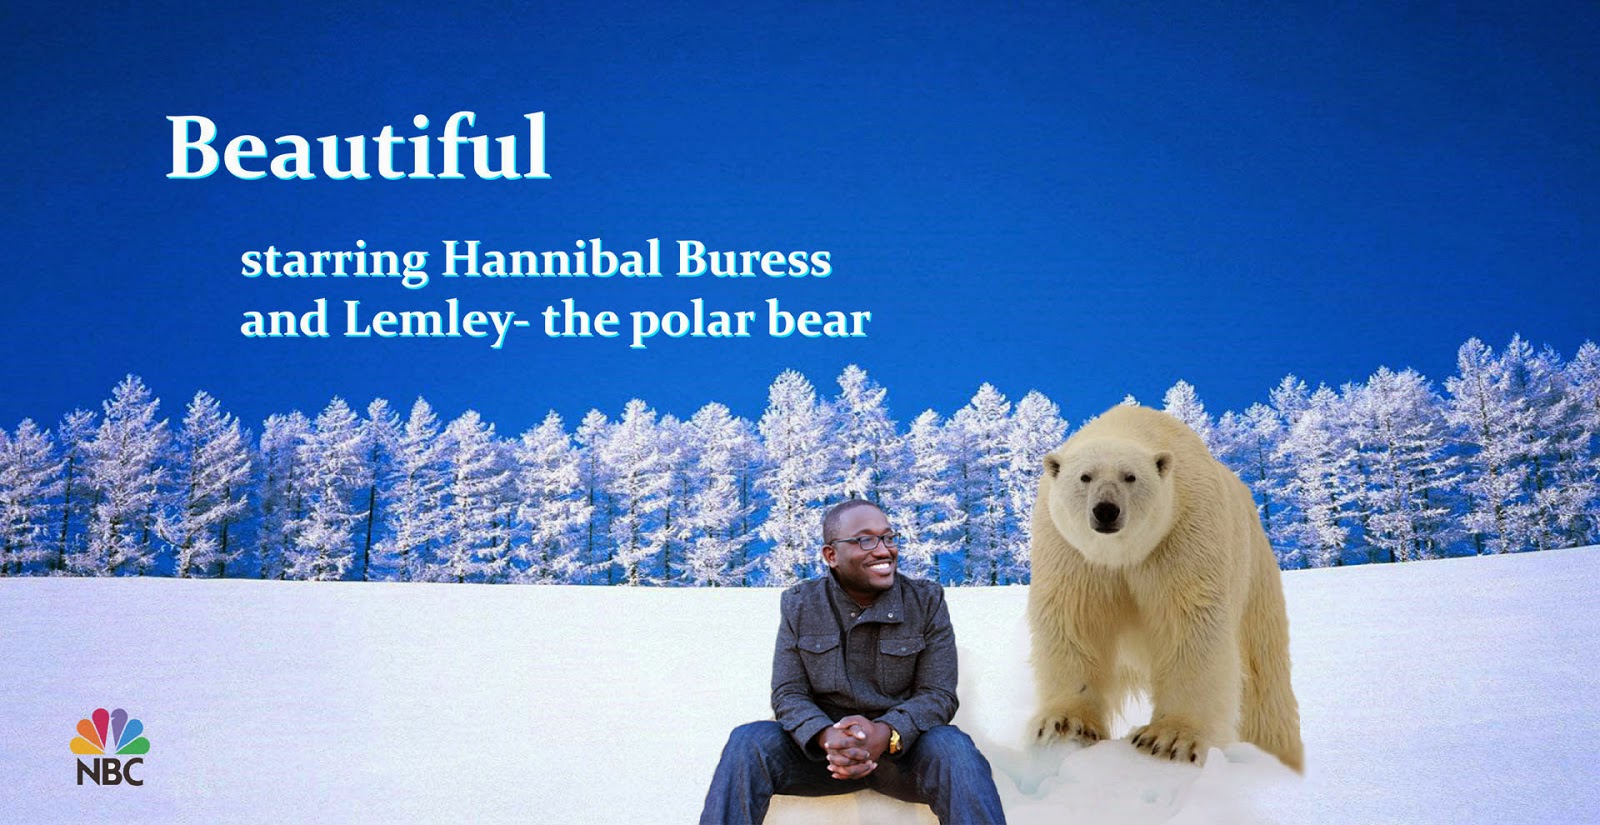 The Regal Peaches - Self Titled EP is Beautiful (starring Hannibal Buress and Lemley the Polar Bear)